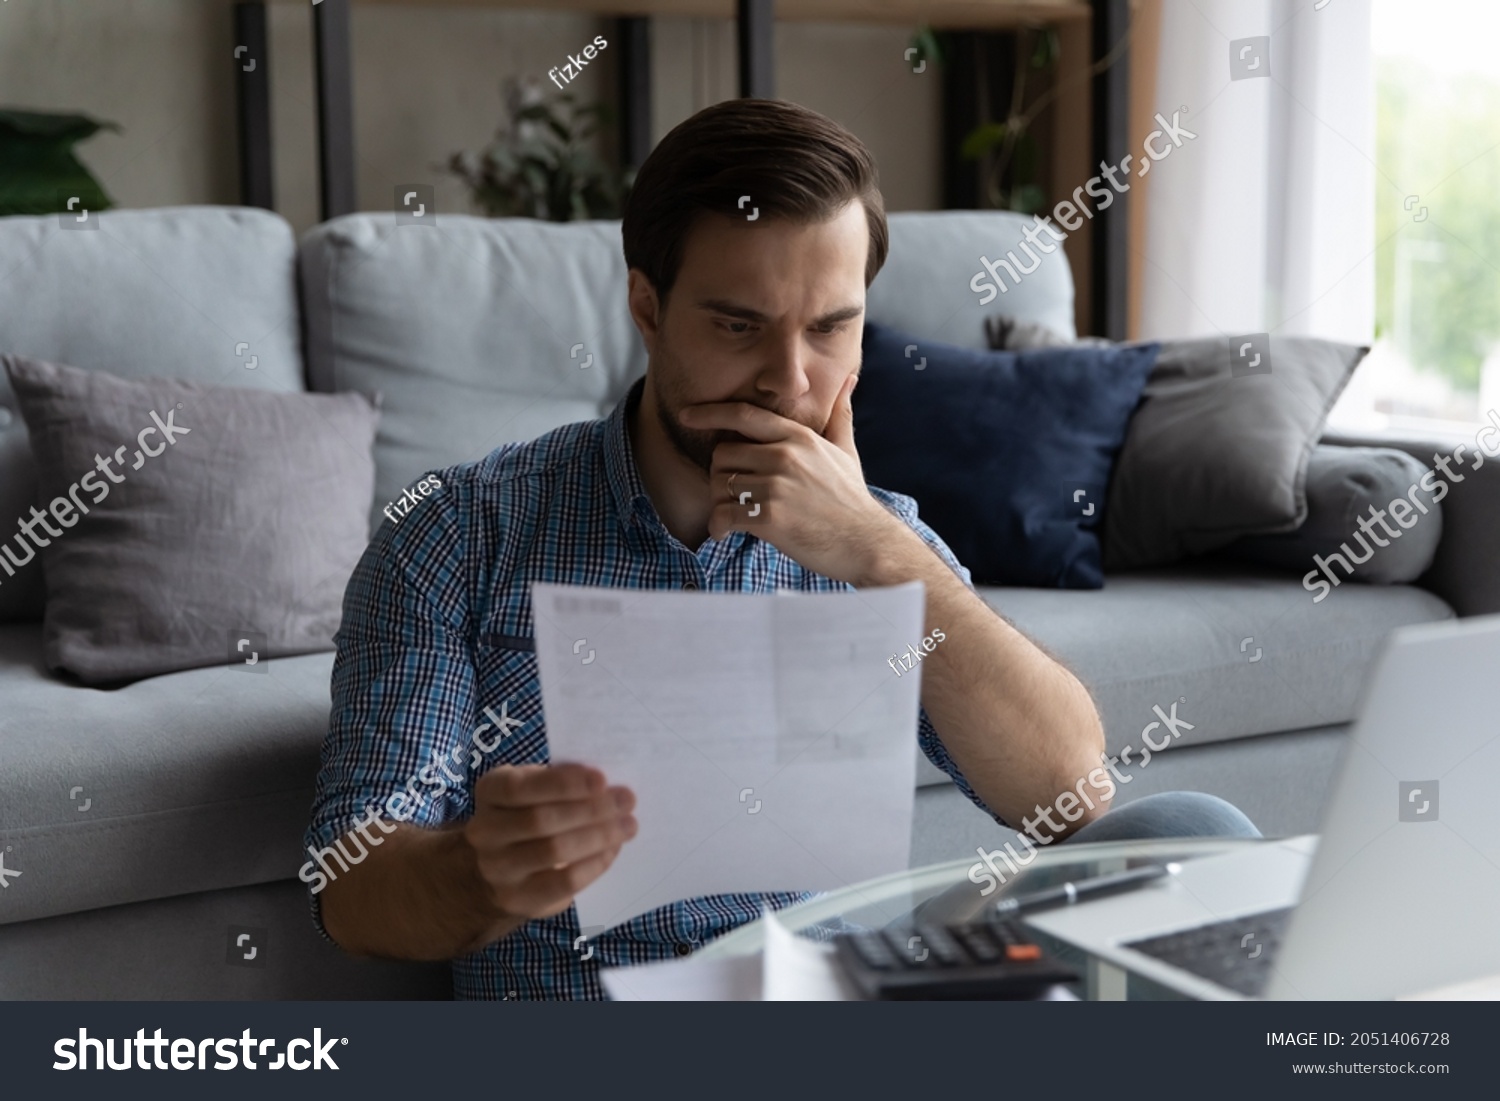 Thoughtful man checking financial documents, holding receipt, calculating domestic bills or taxes, using laptop, unhappy pensive young male touching chin, unexpected debt or bankruptcy concept #2051406728